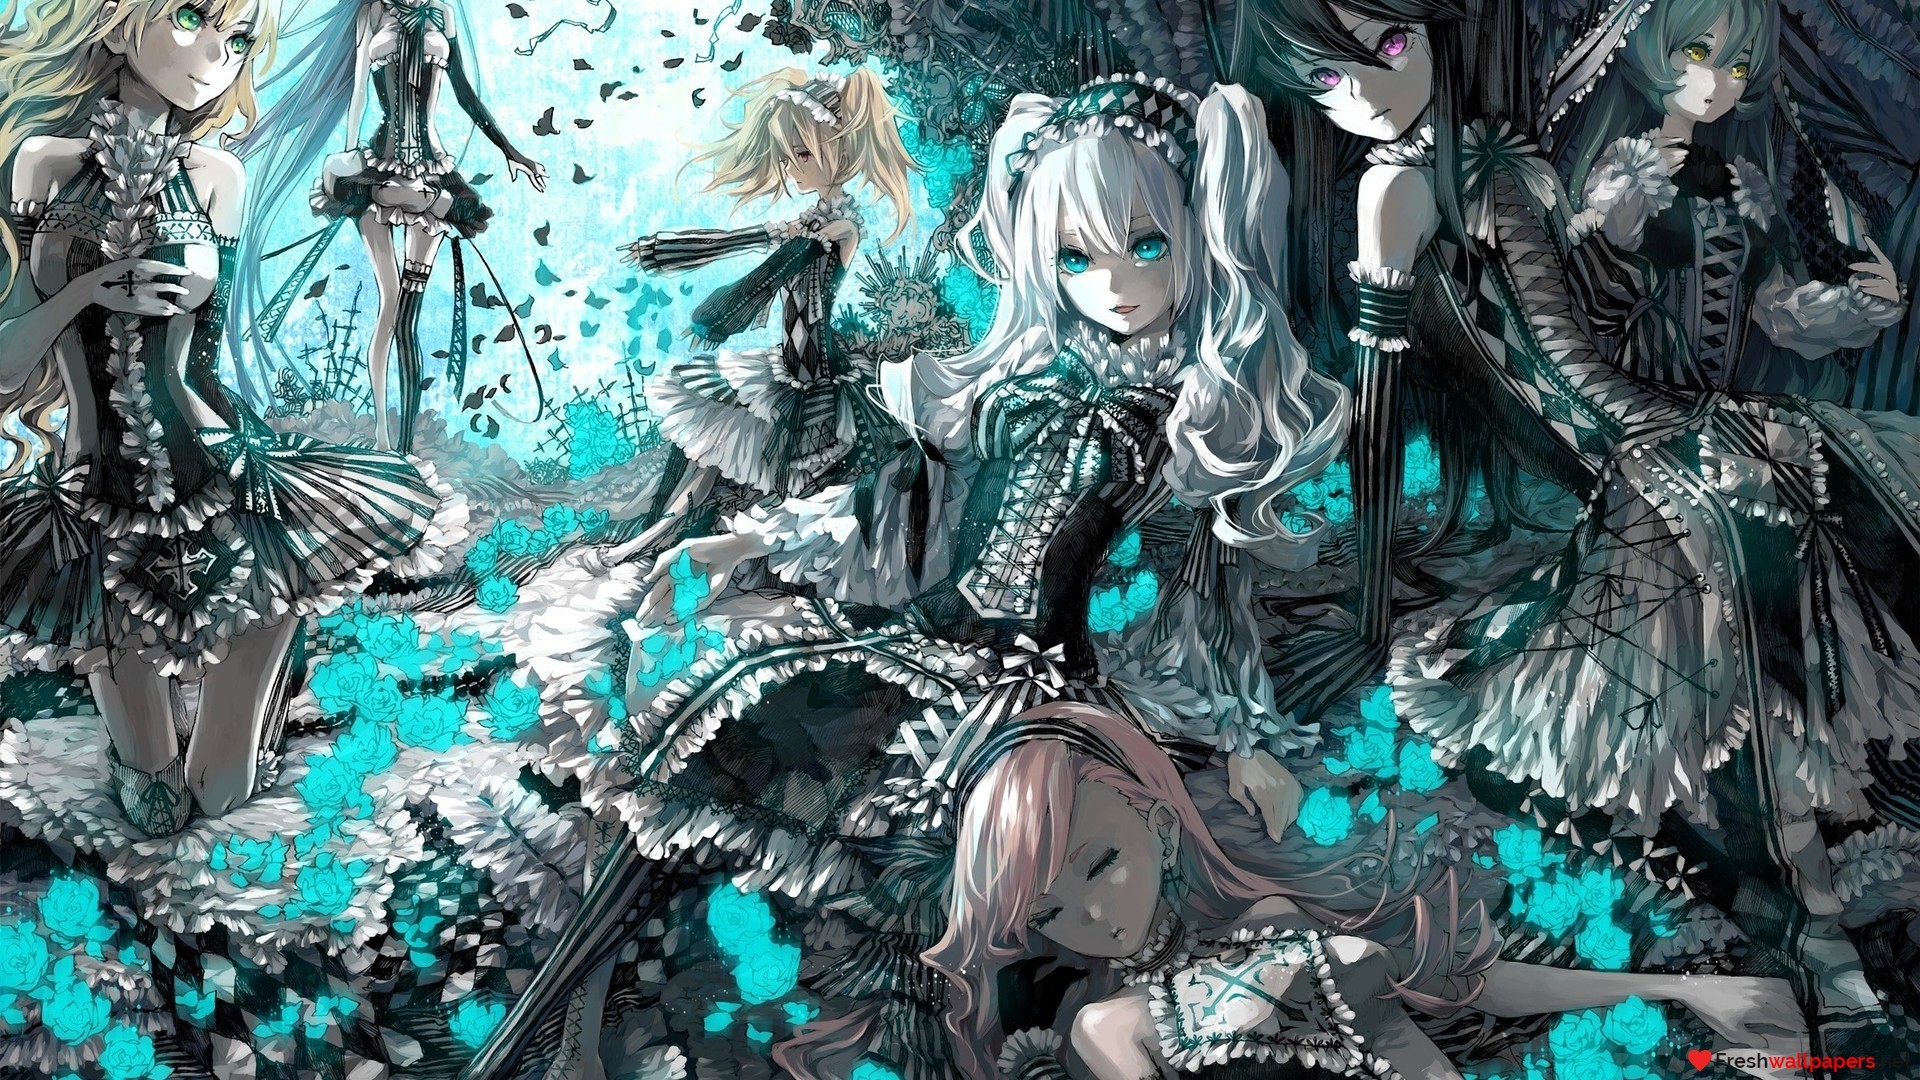 1920x1080 gothic anime image hd hd wallpapers high definition amazing mac desktop  images samsung phone wallpapers widescreen display digital photos 1920Ã1080  ...